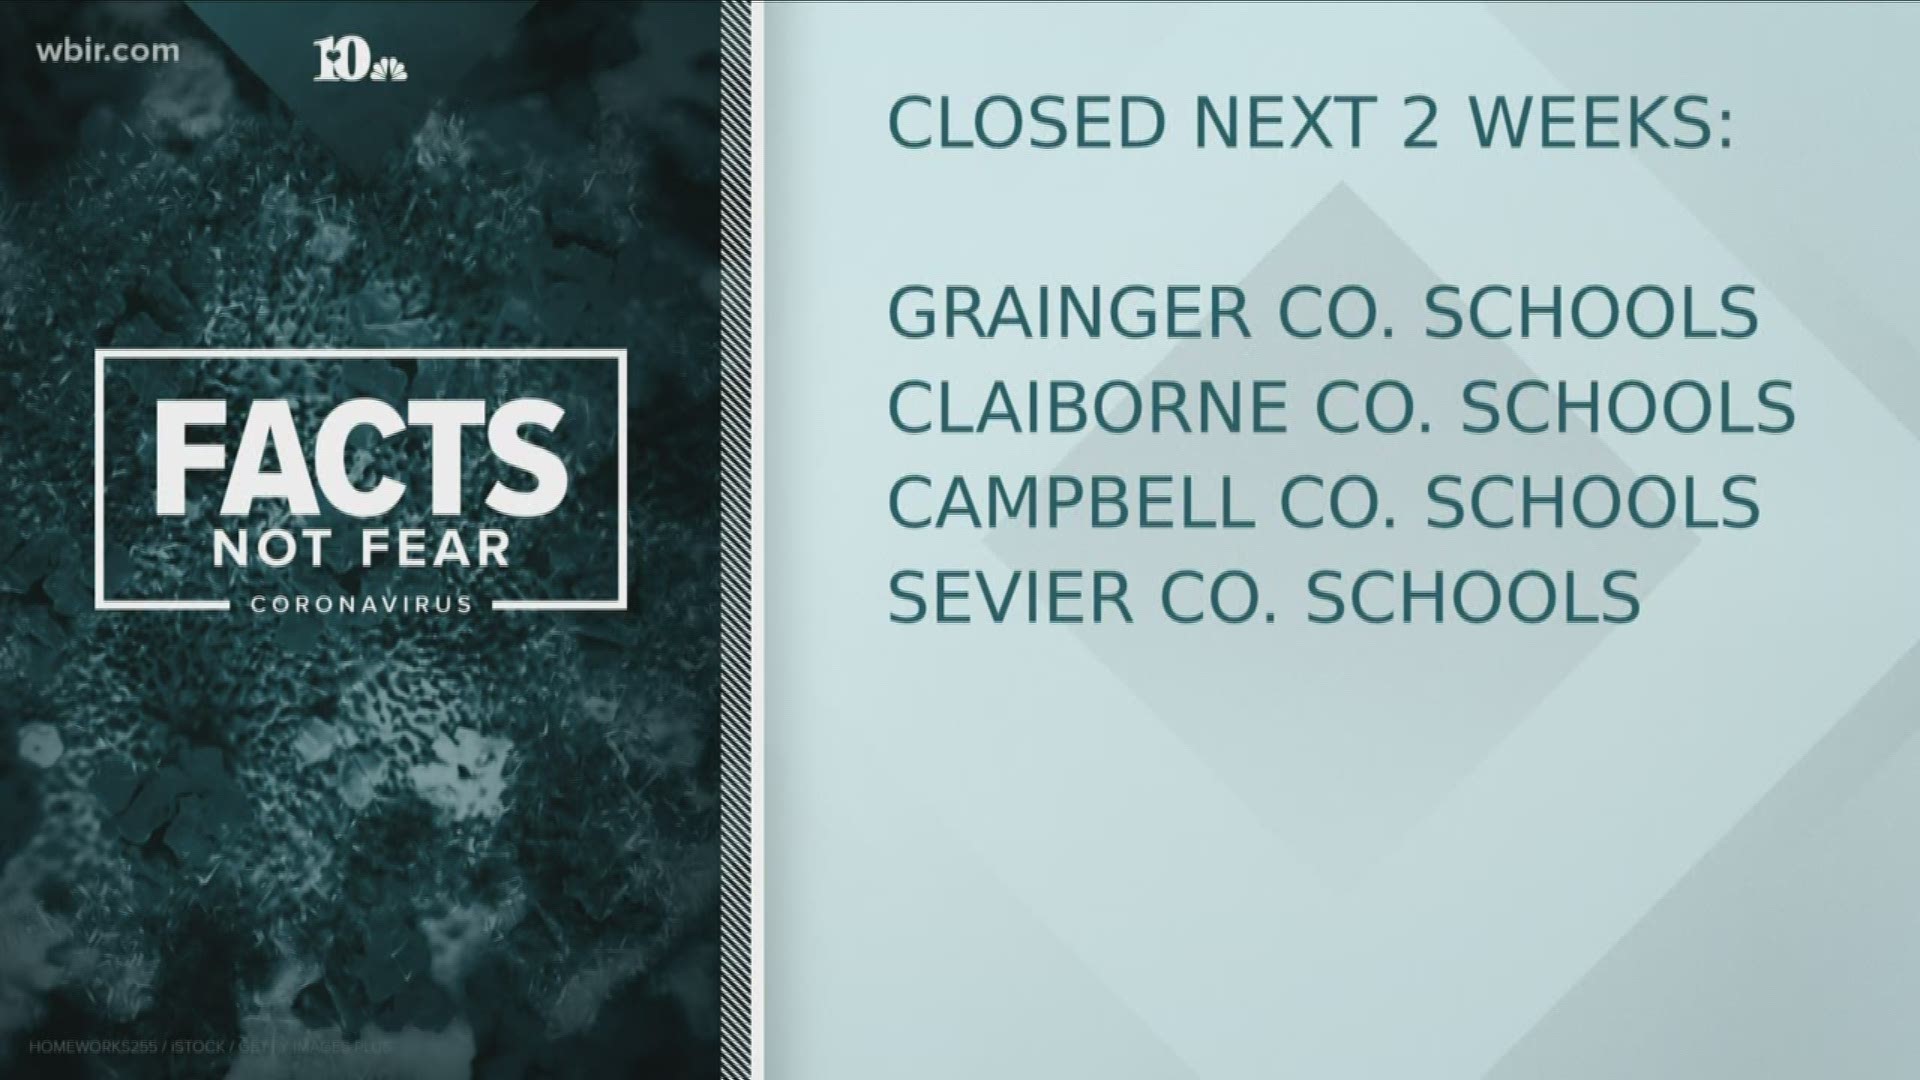 Cocke County, Grainger County, Claiborne County, Campbell County and Sevier County schools will be closed for the next two weeks.